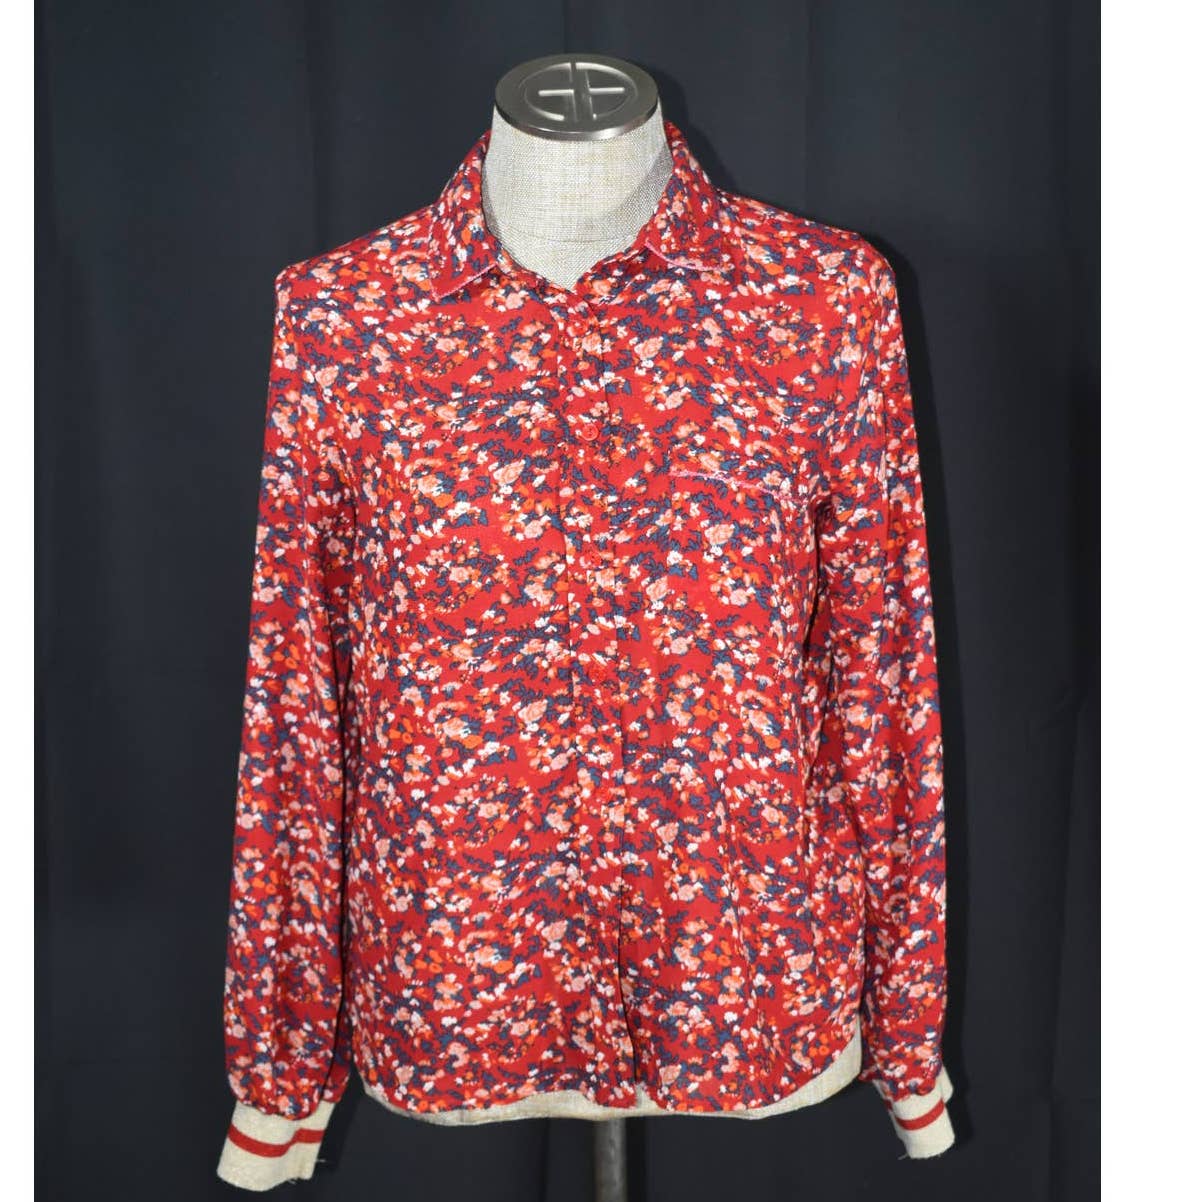 Grace & Mila Red Floral Long Sleeve Rochelle Button Up Top - S